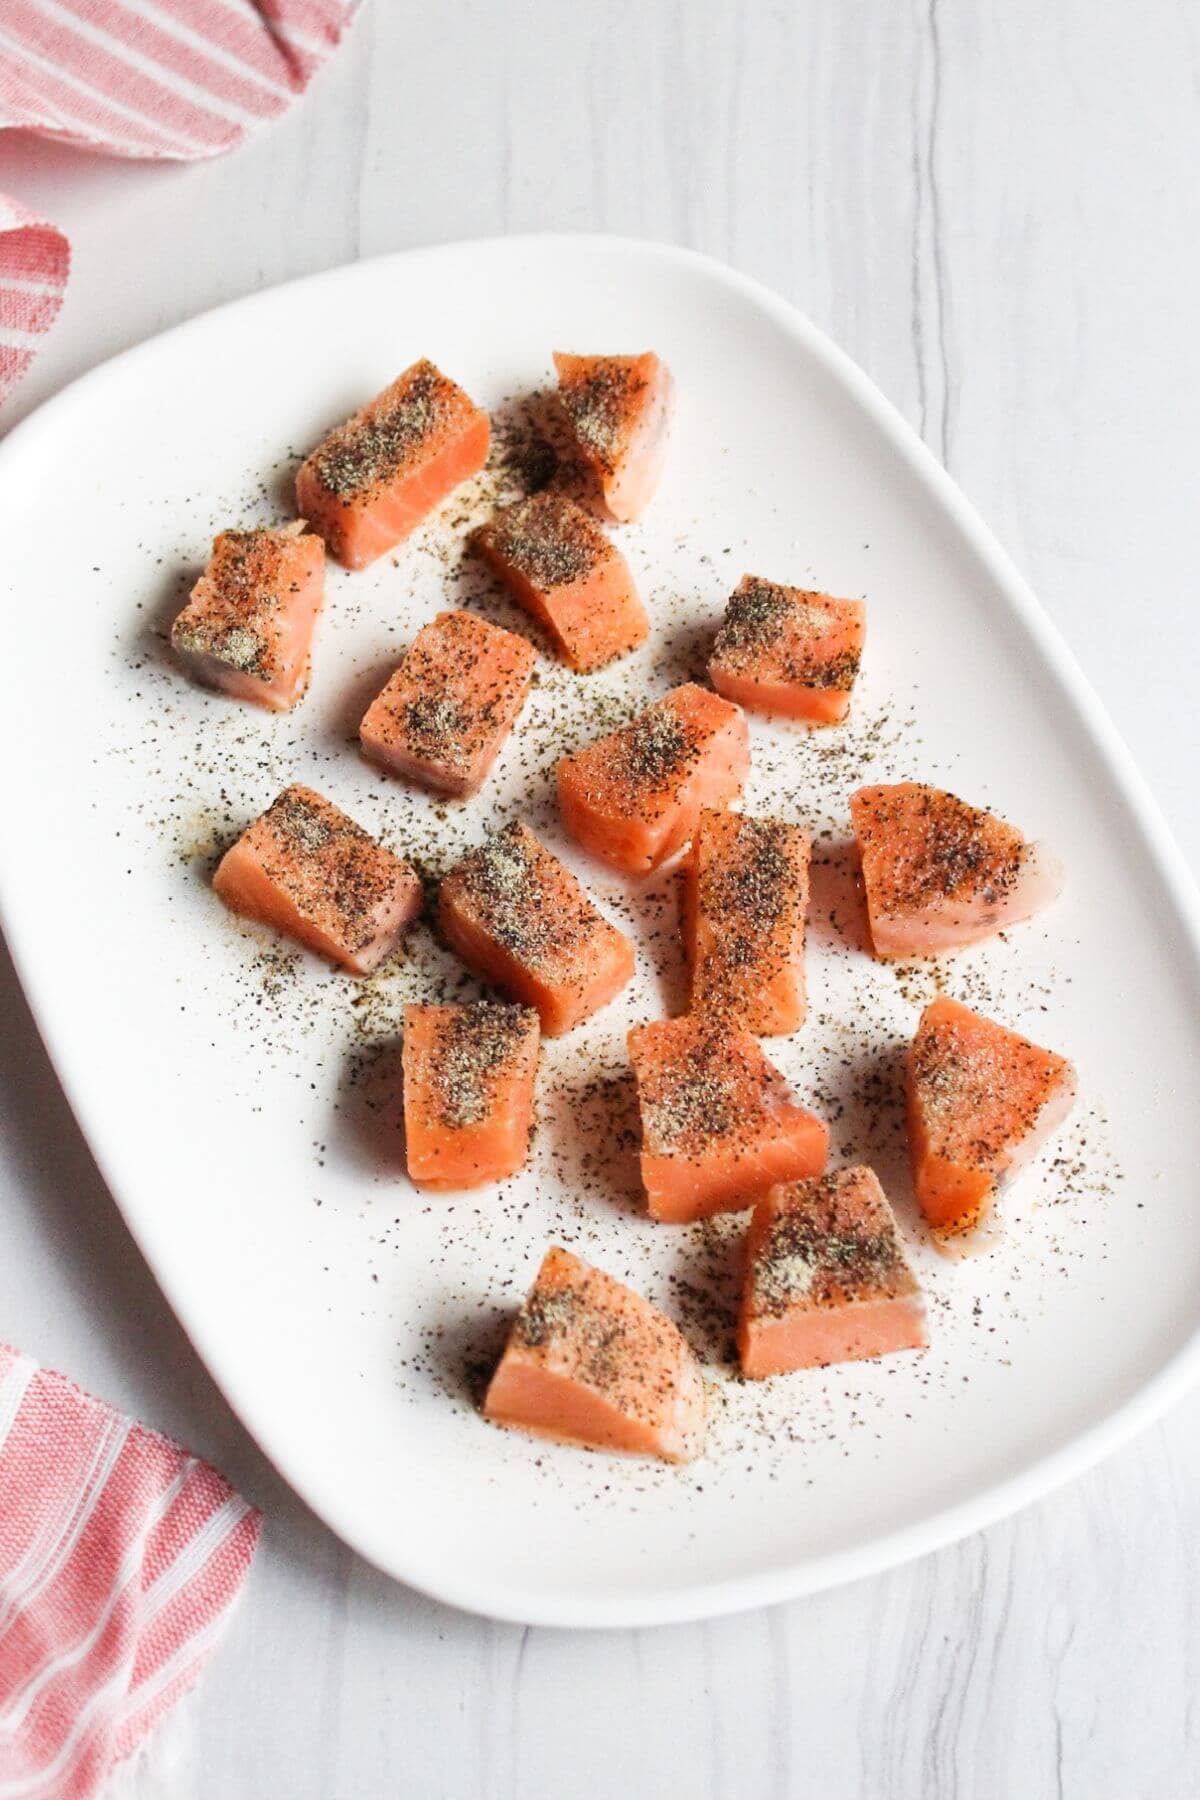 Seasoned salmon cubes on a white plate.